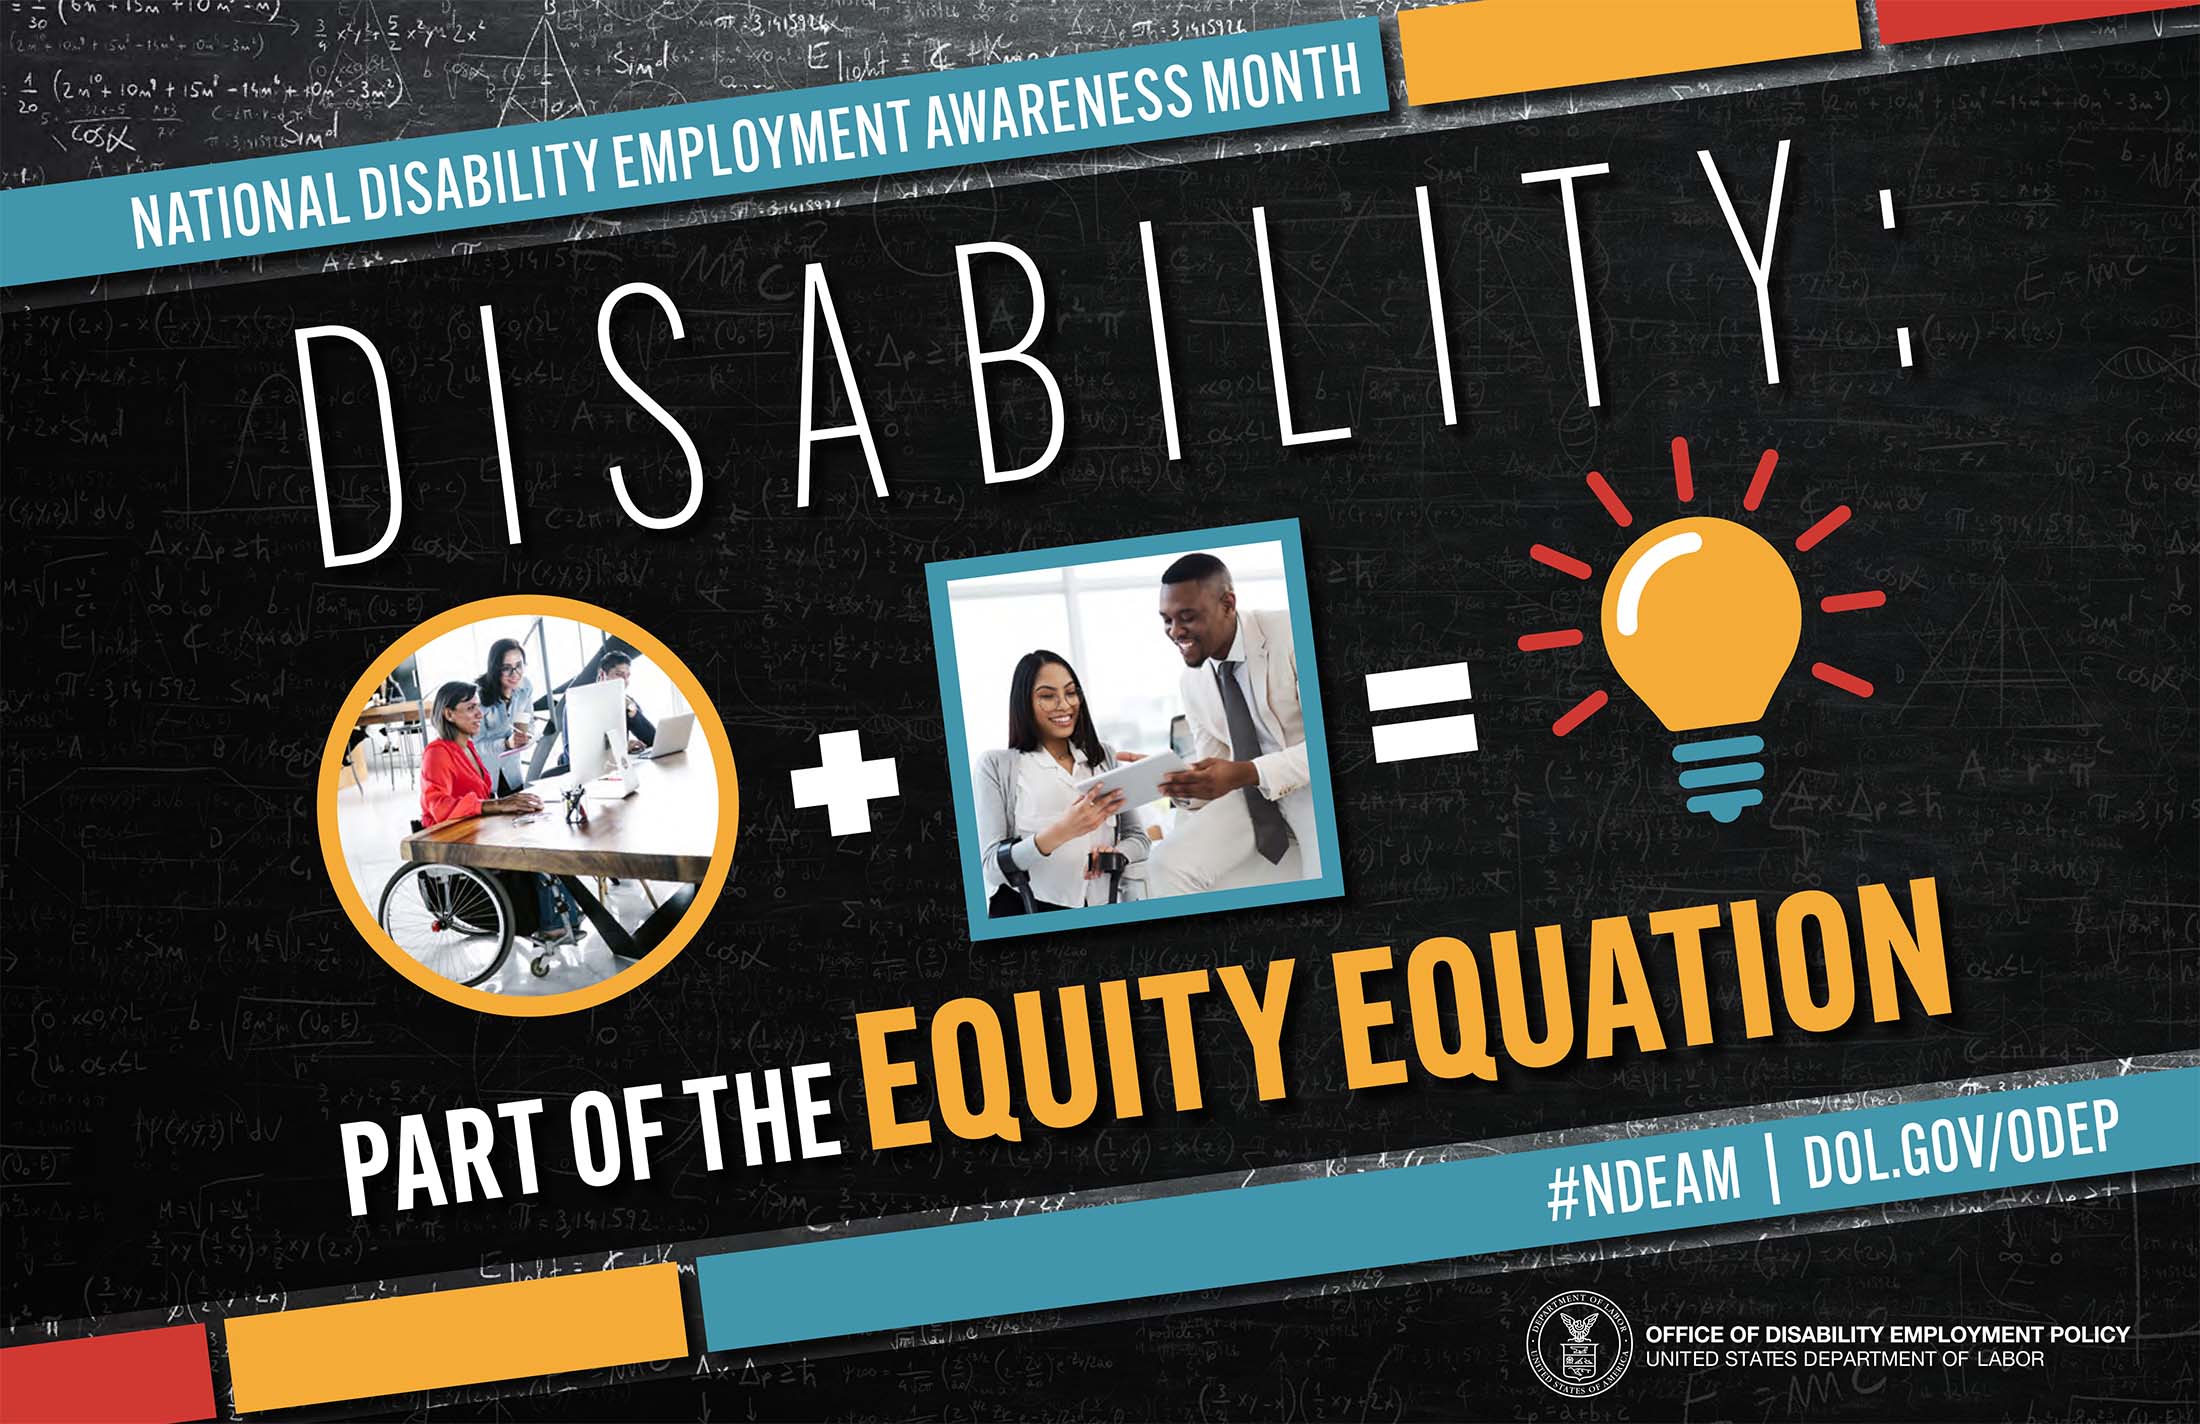 National Disability Employment Awareness Month. Disability: Part of the Equity Equation, text over an equation made of images. The first image is a woman in a wheelchair at a computer, this is added to an image of two people looking at a tablet screen. The sum of those images is a light bulb.